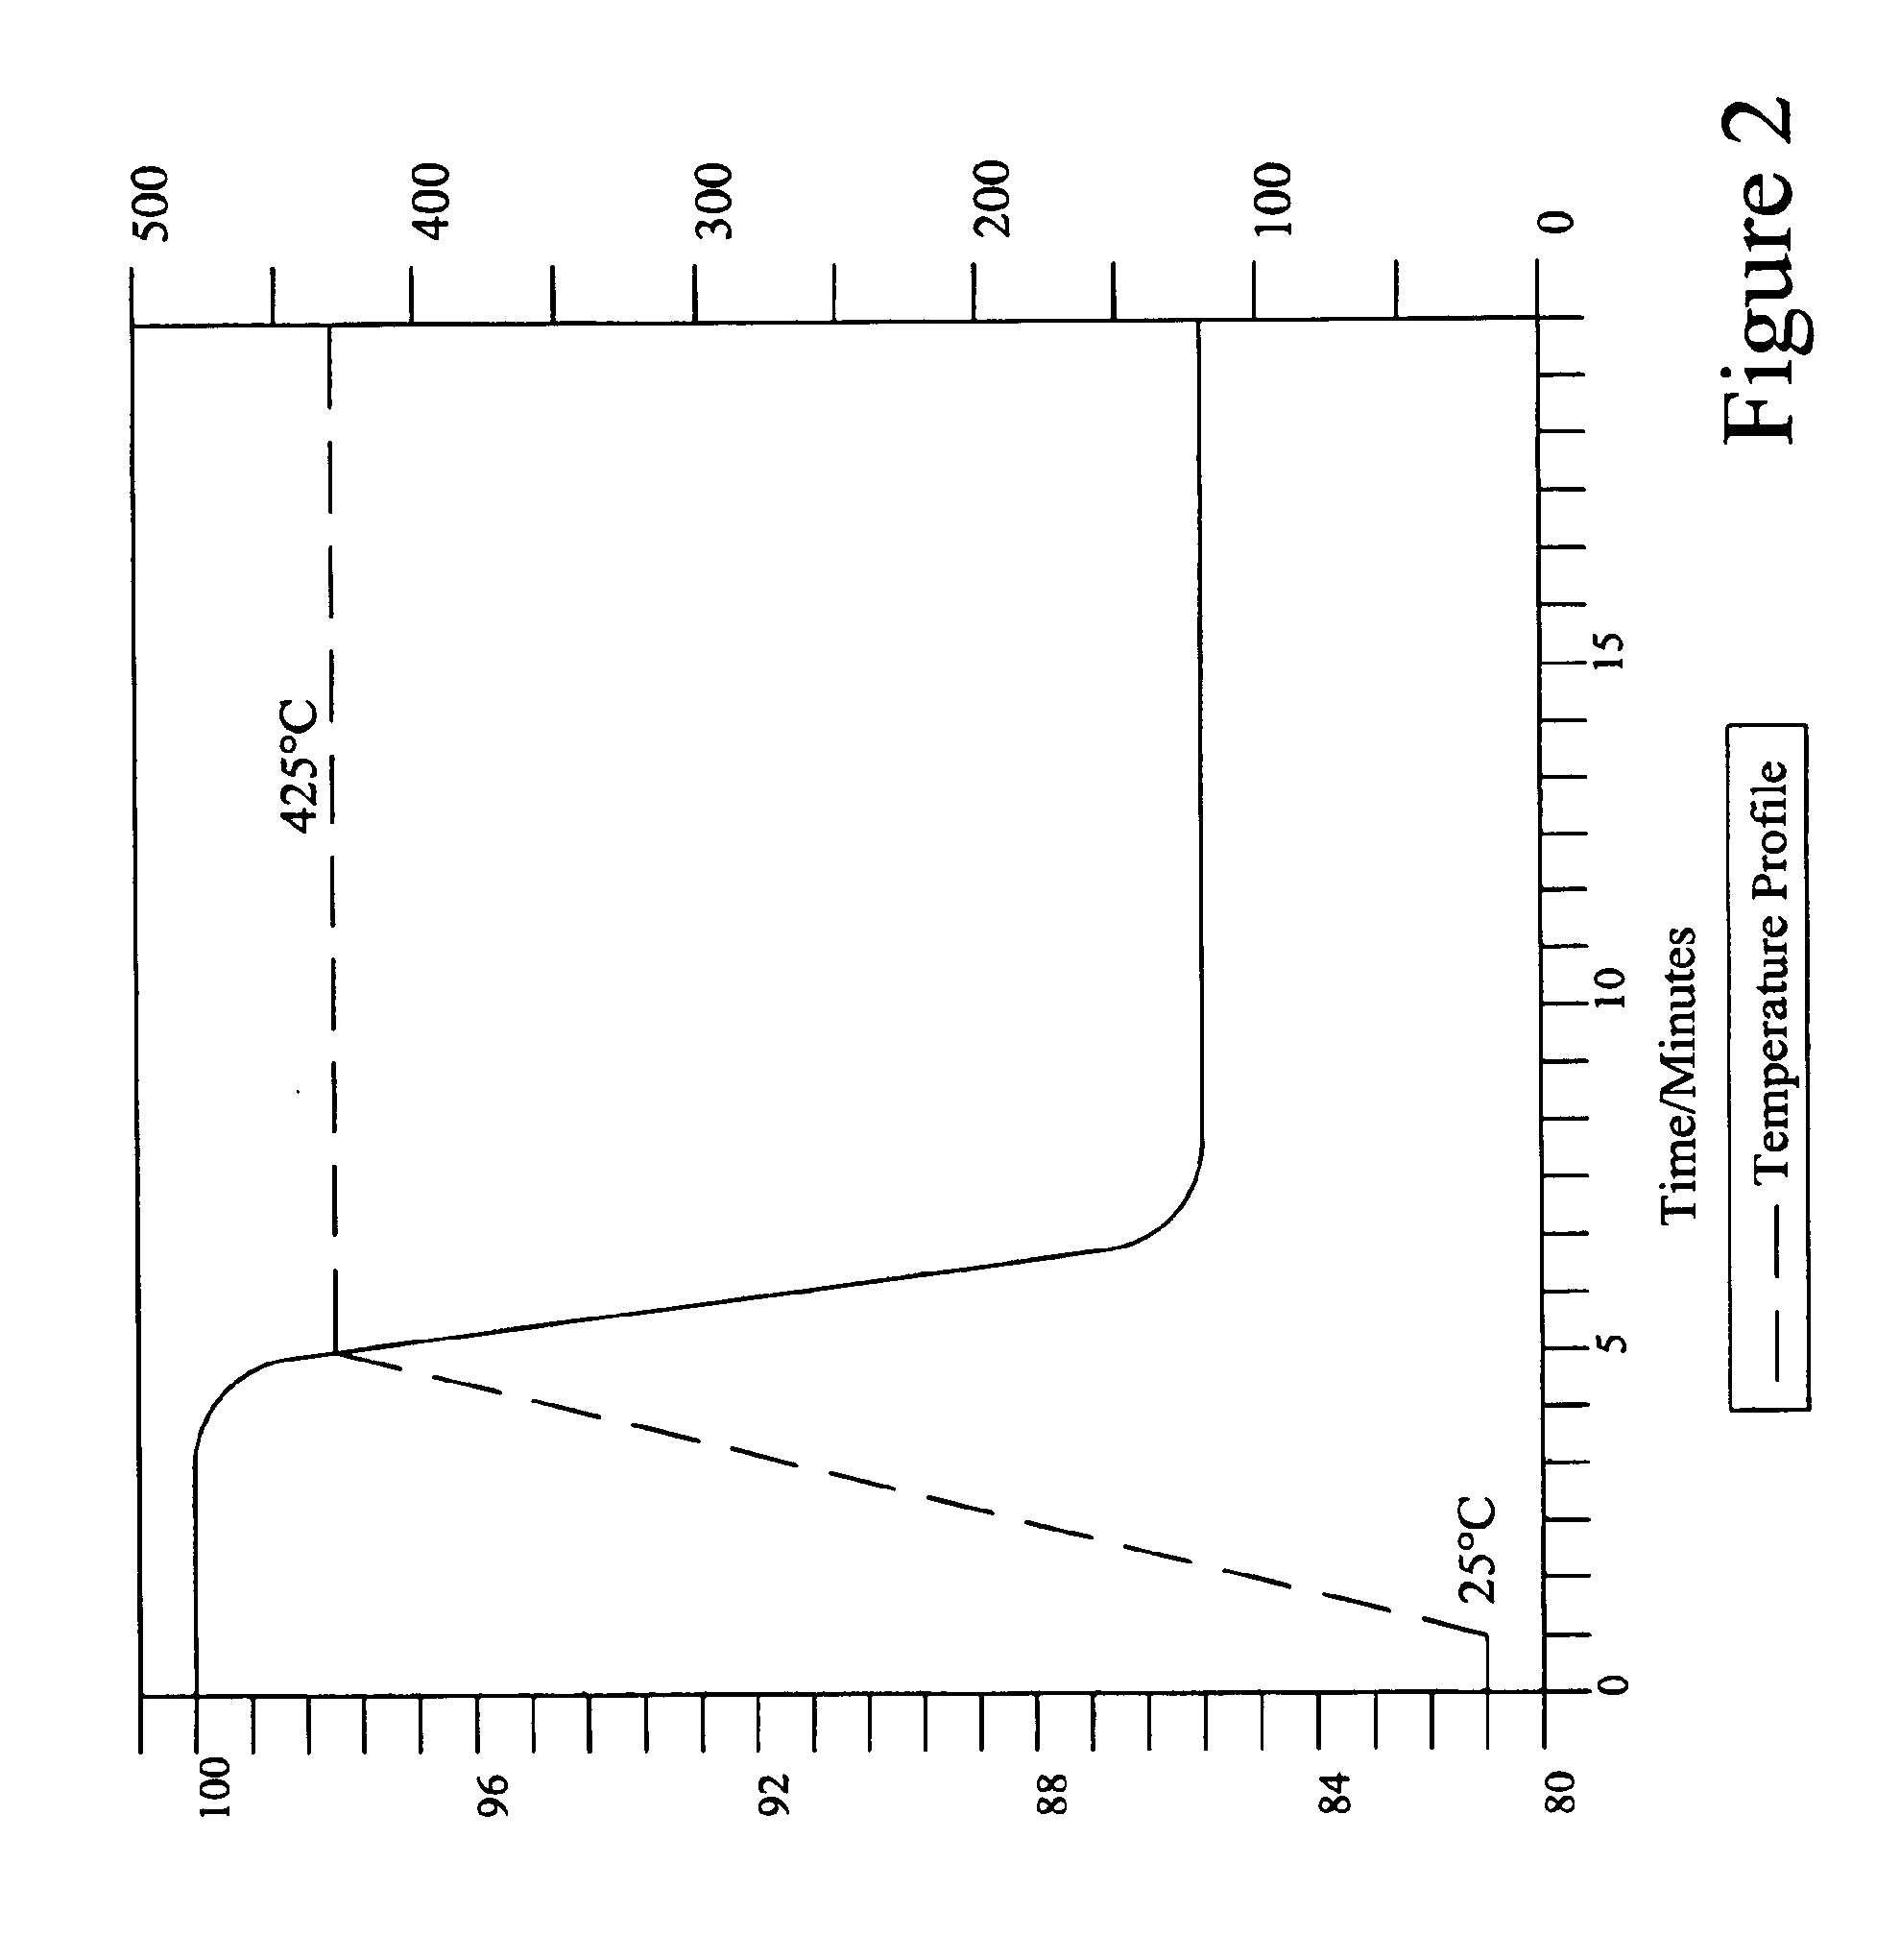 Solid mercury releasing material and method of dosing mercury into discharge lamps